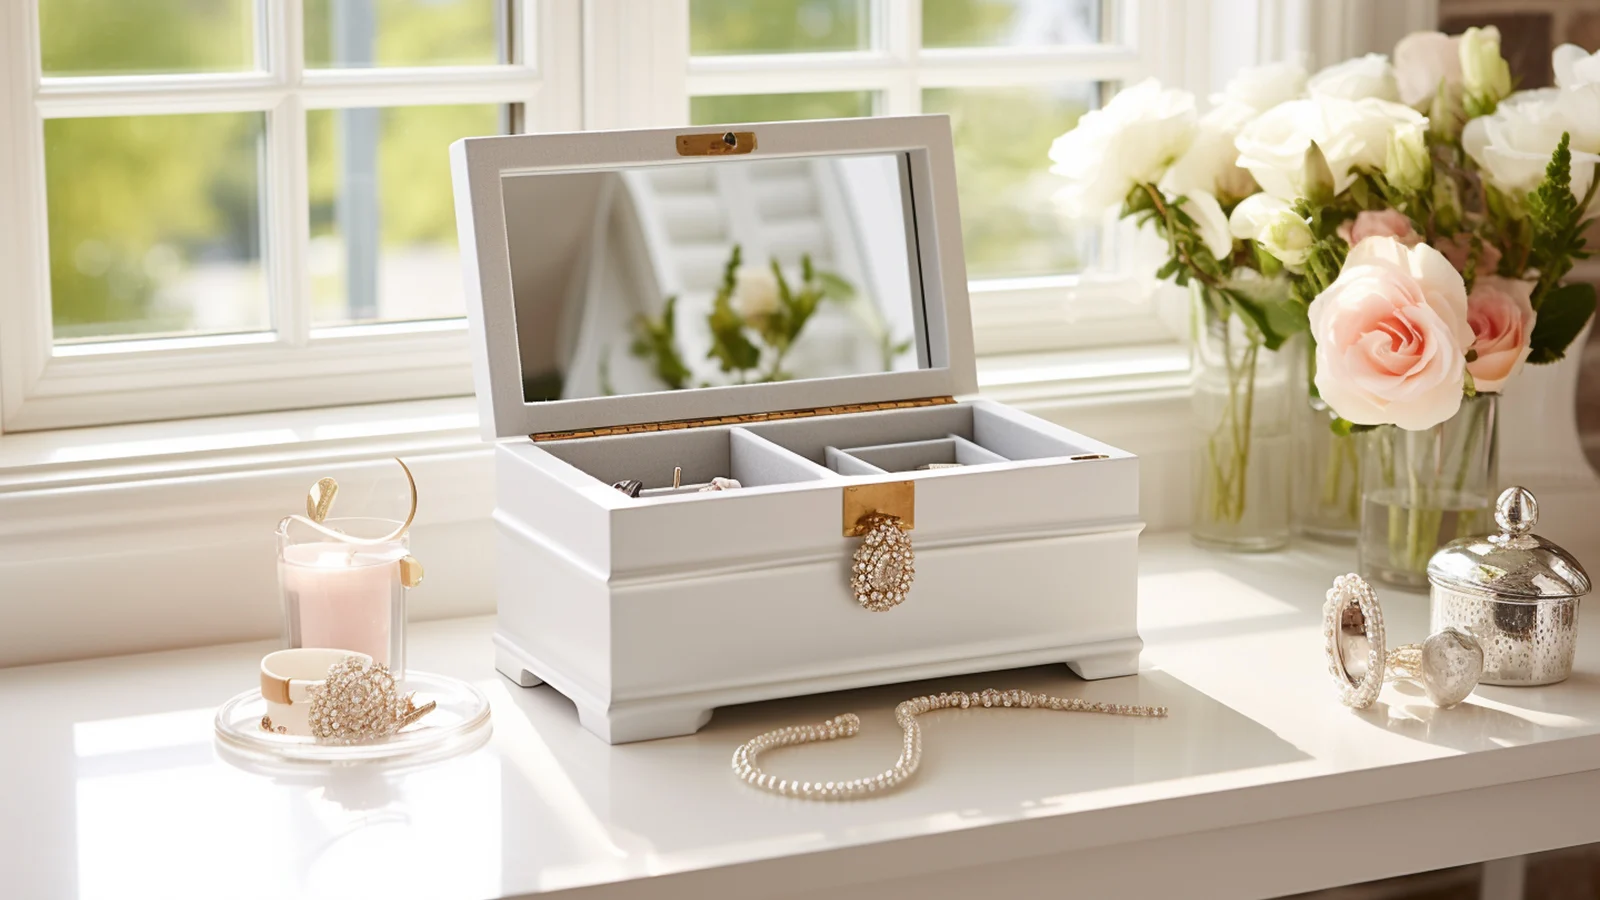 Small bathroom counter decorating ideas: a white jewelry box sits on a window sill.